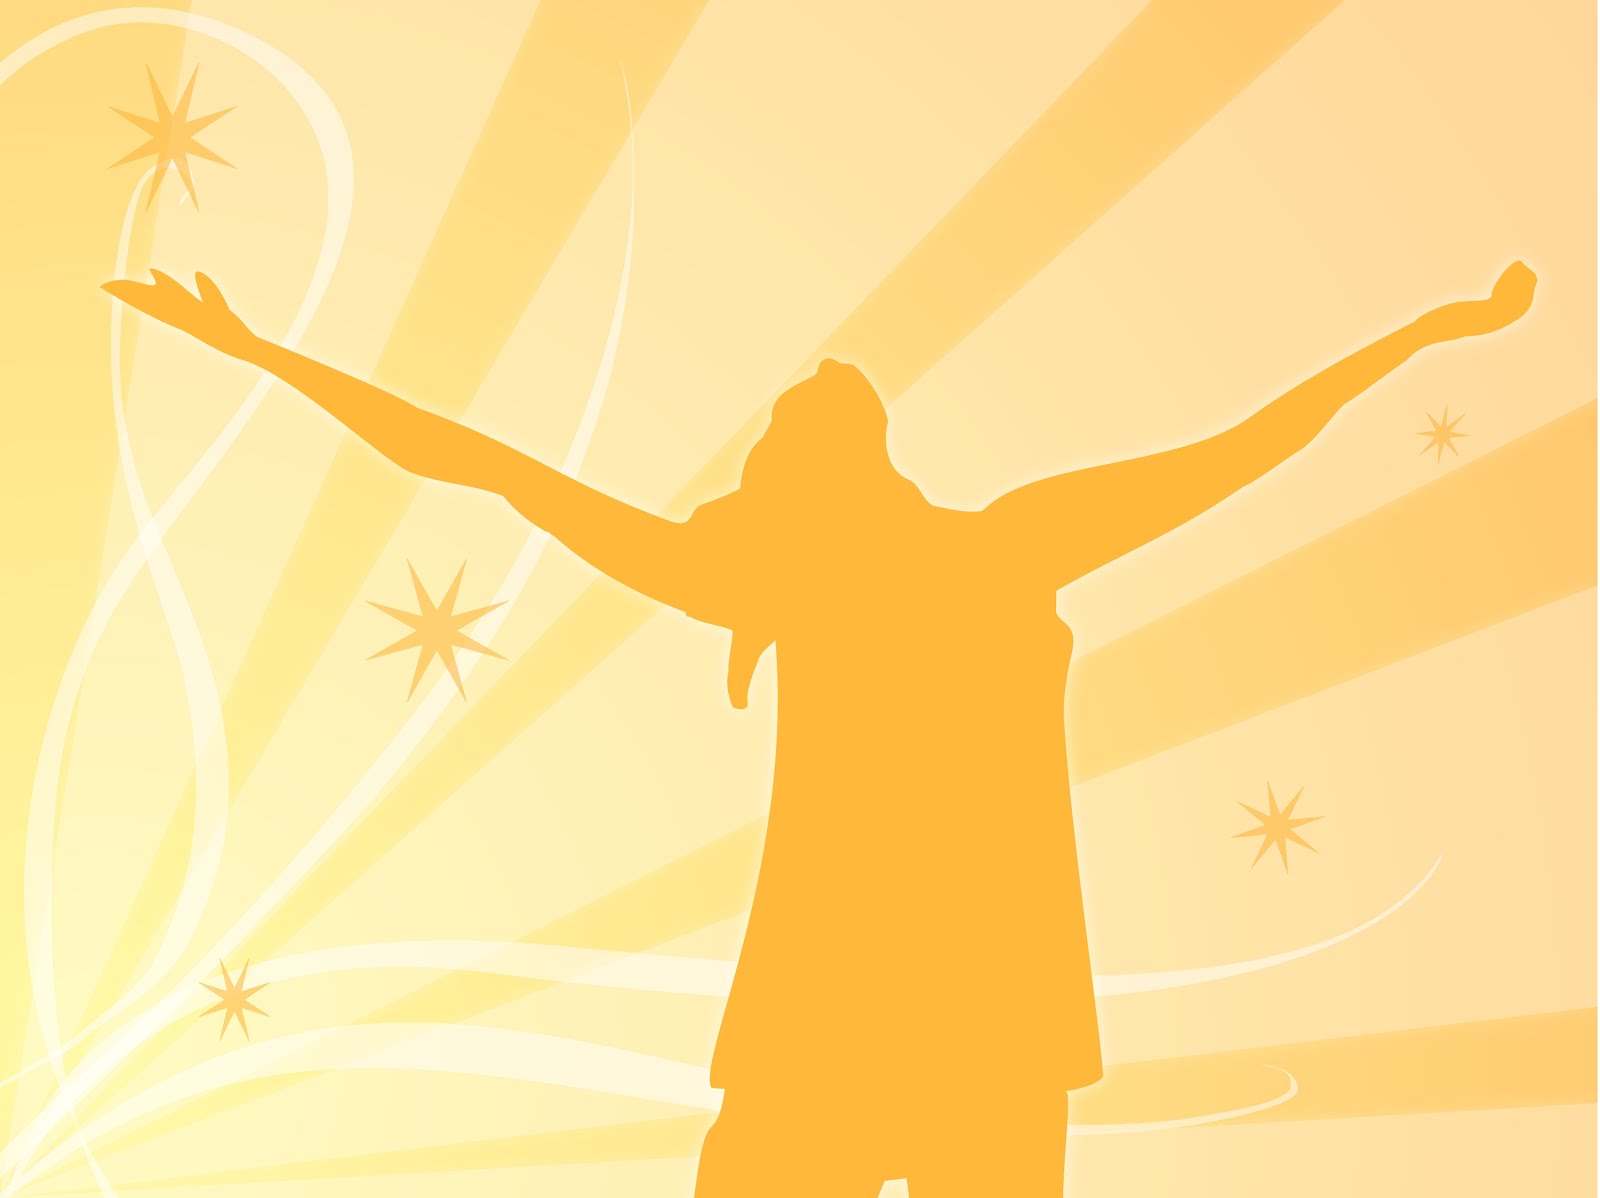 Worship Praise Silhouette Images  Pictures - Becuo